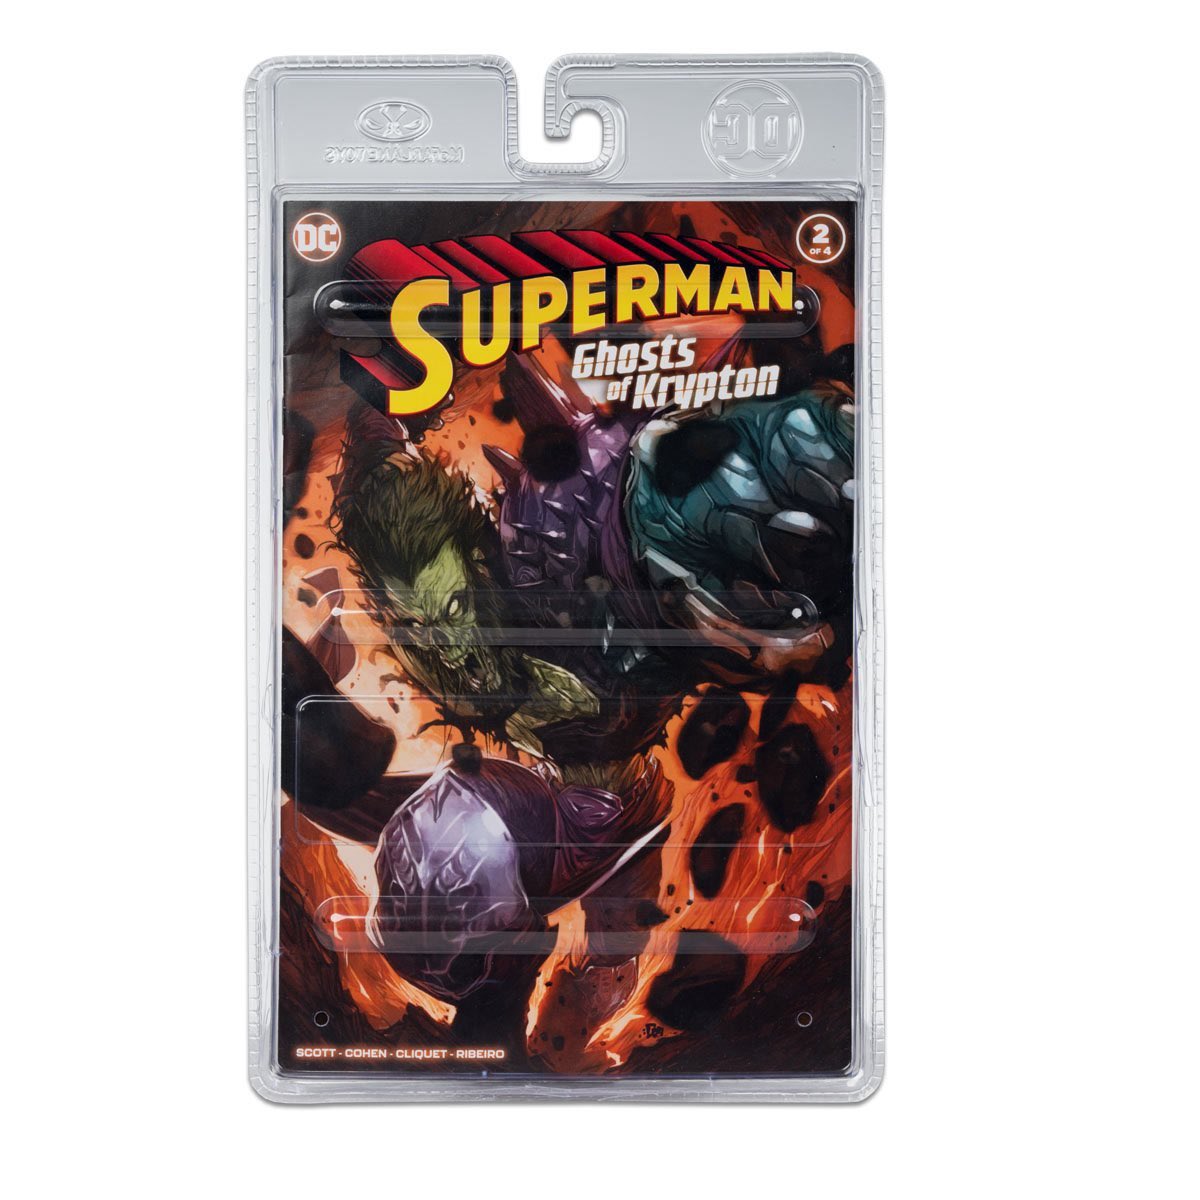 McFarlane Toys Page Punchers, Superman: Ghosts of Krypton - Ghost of Zod! entertainmentearth.com/product/mf1594… #DCComics #Superman